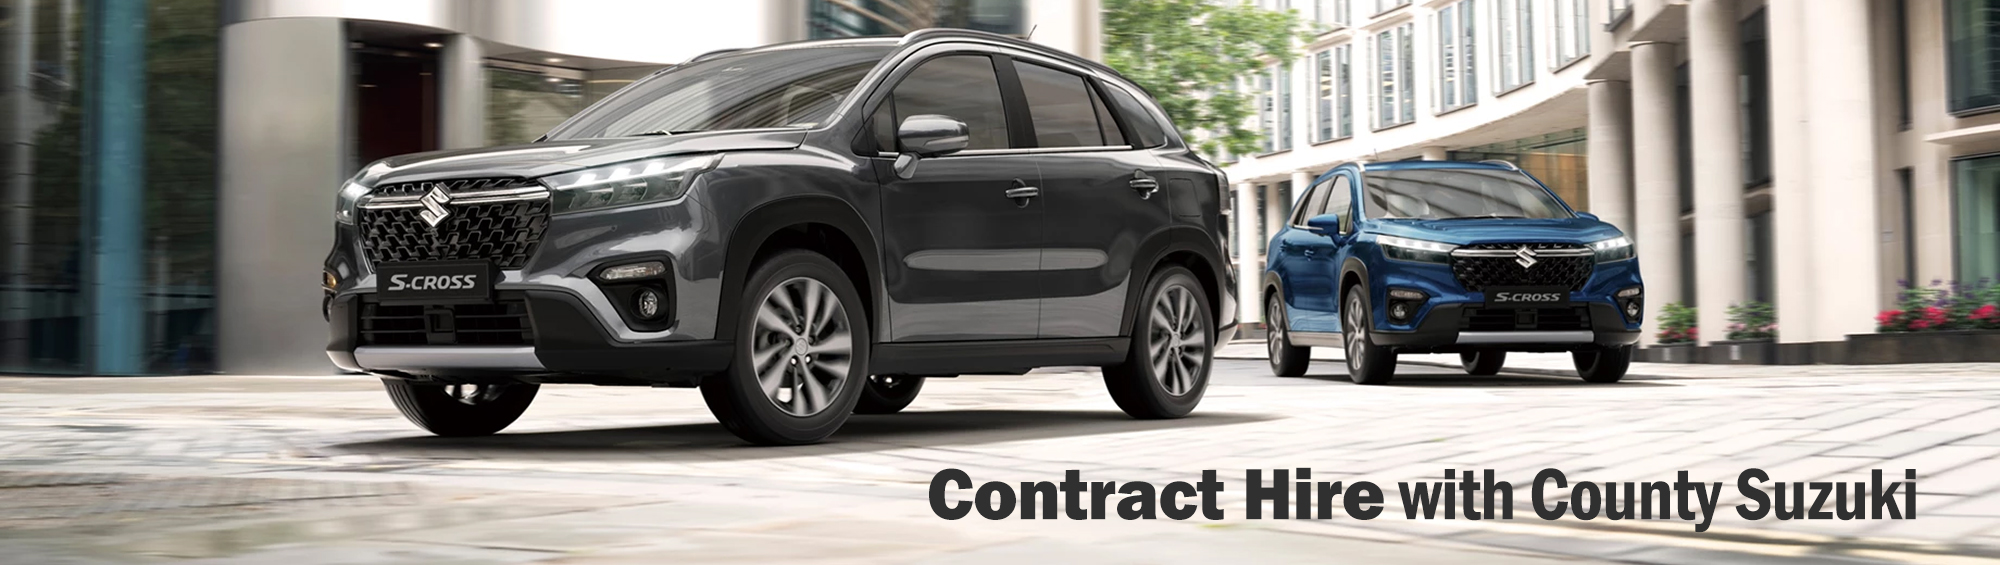 Welcome to the latest Personal Contract Hire (PCH) offers at County Suzuki